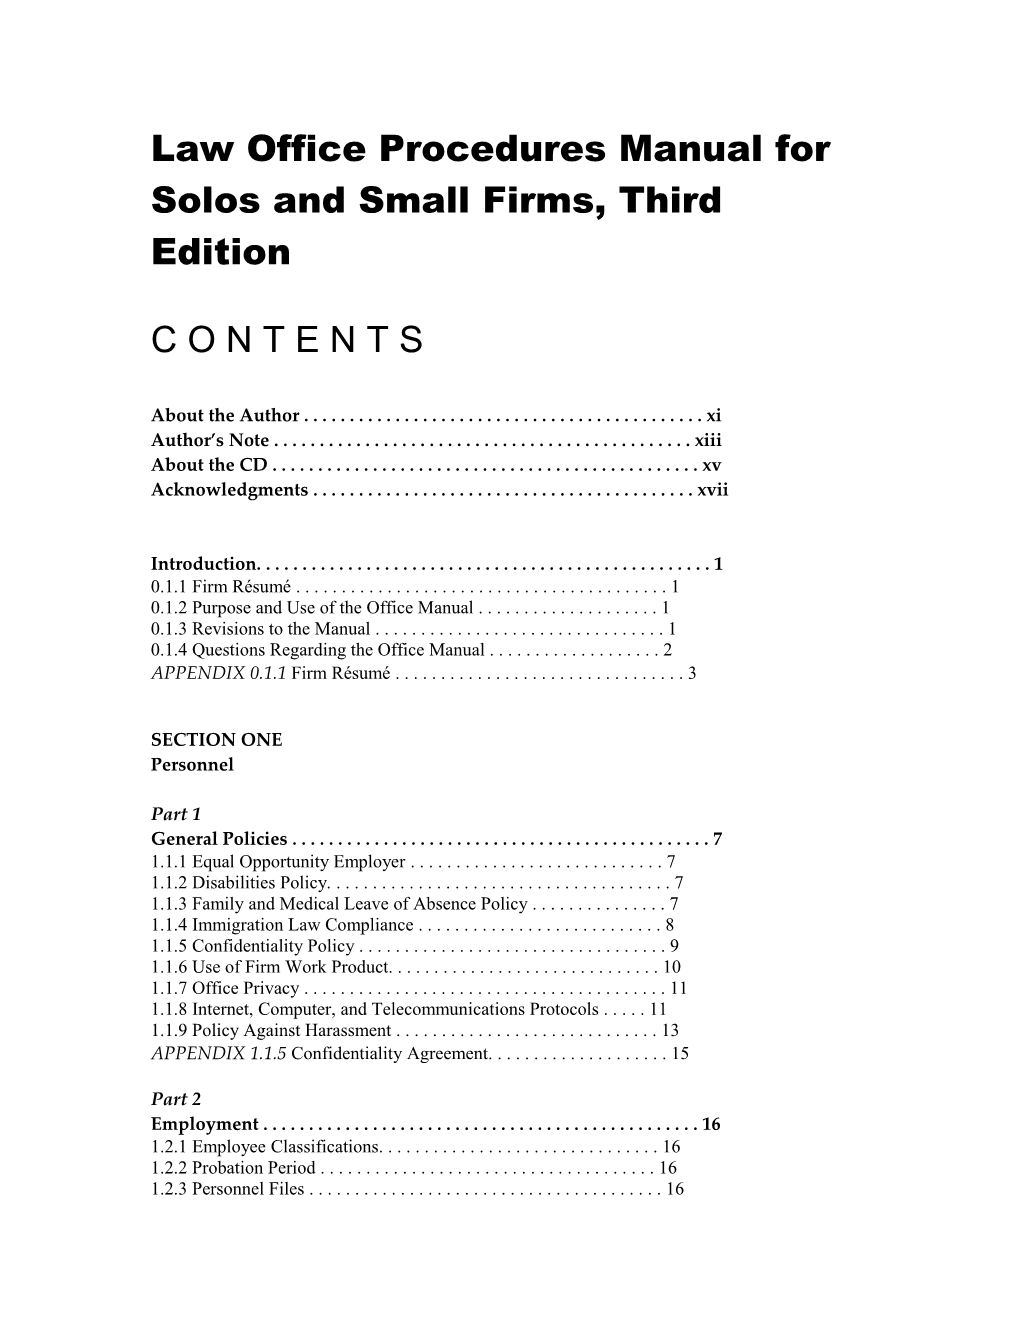 Law Office Procedures Manual for Solos and Small Firms, Third Edition